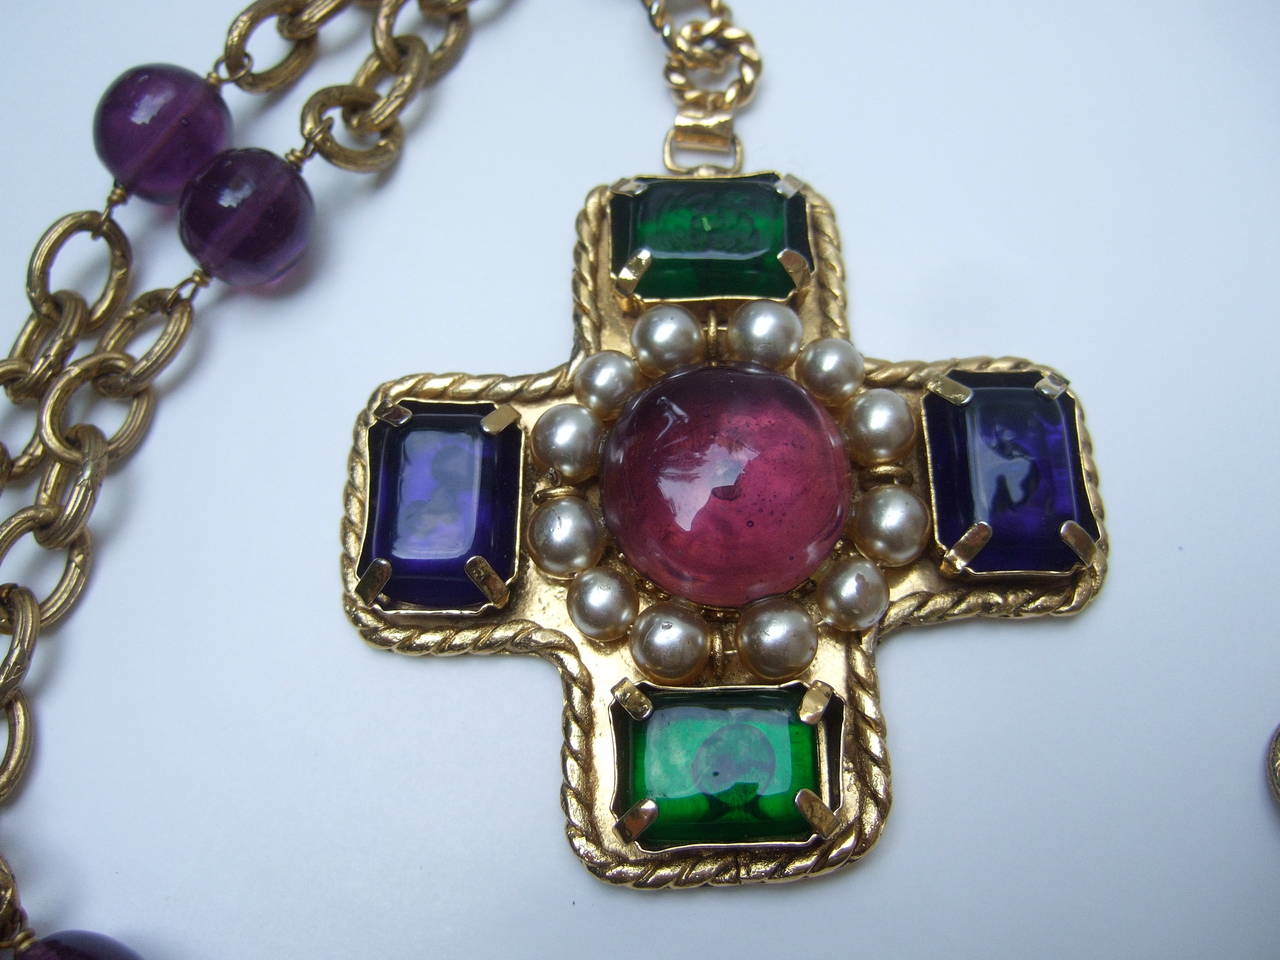 Chanel exquisite poured glass cross pendant necklace
The magnificent necklace is adorned with a jeweled cross pendant 
The cross is encrusted with a large center amethyst glass cabochon 
surrounded by a wreath of lustrous glass enamel